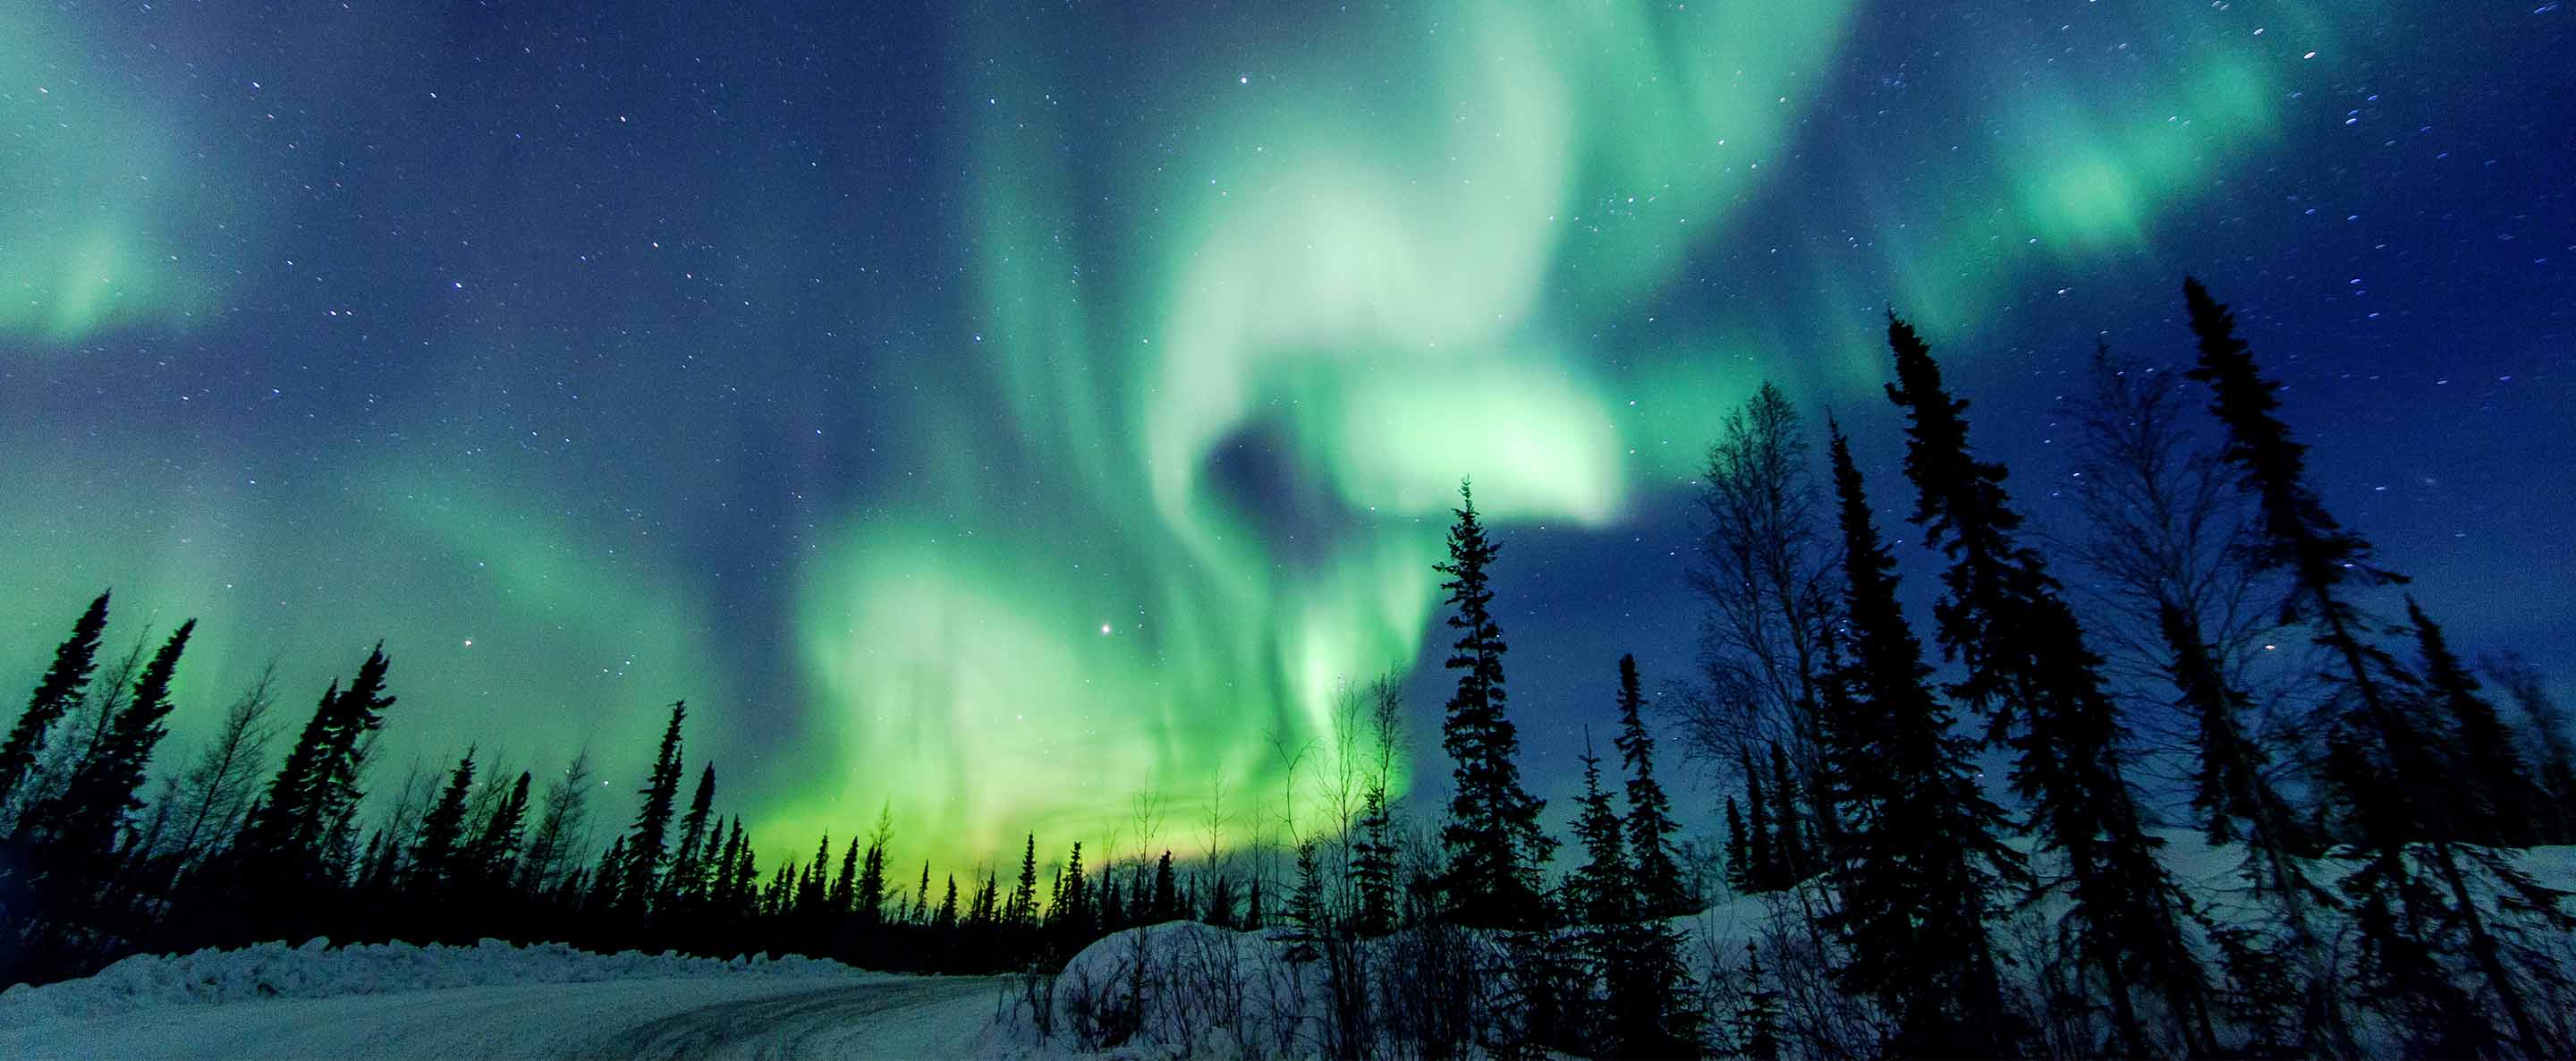 Northern Lights close to Yellowknife